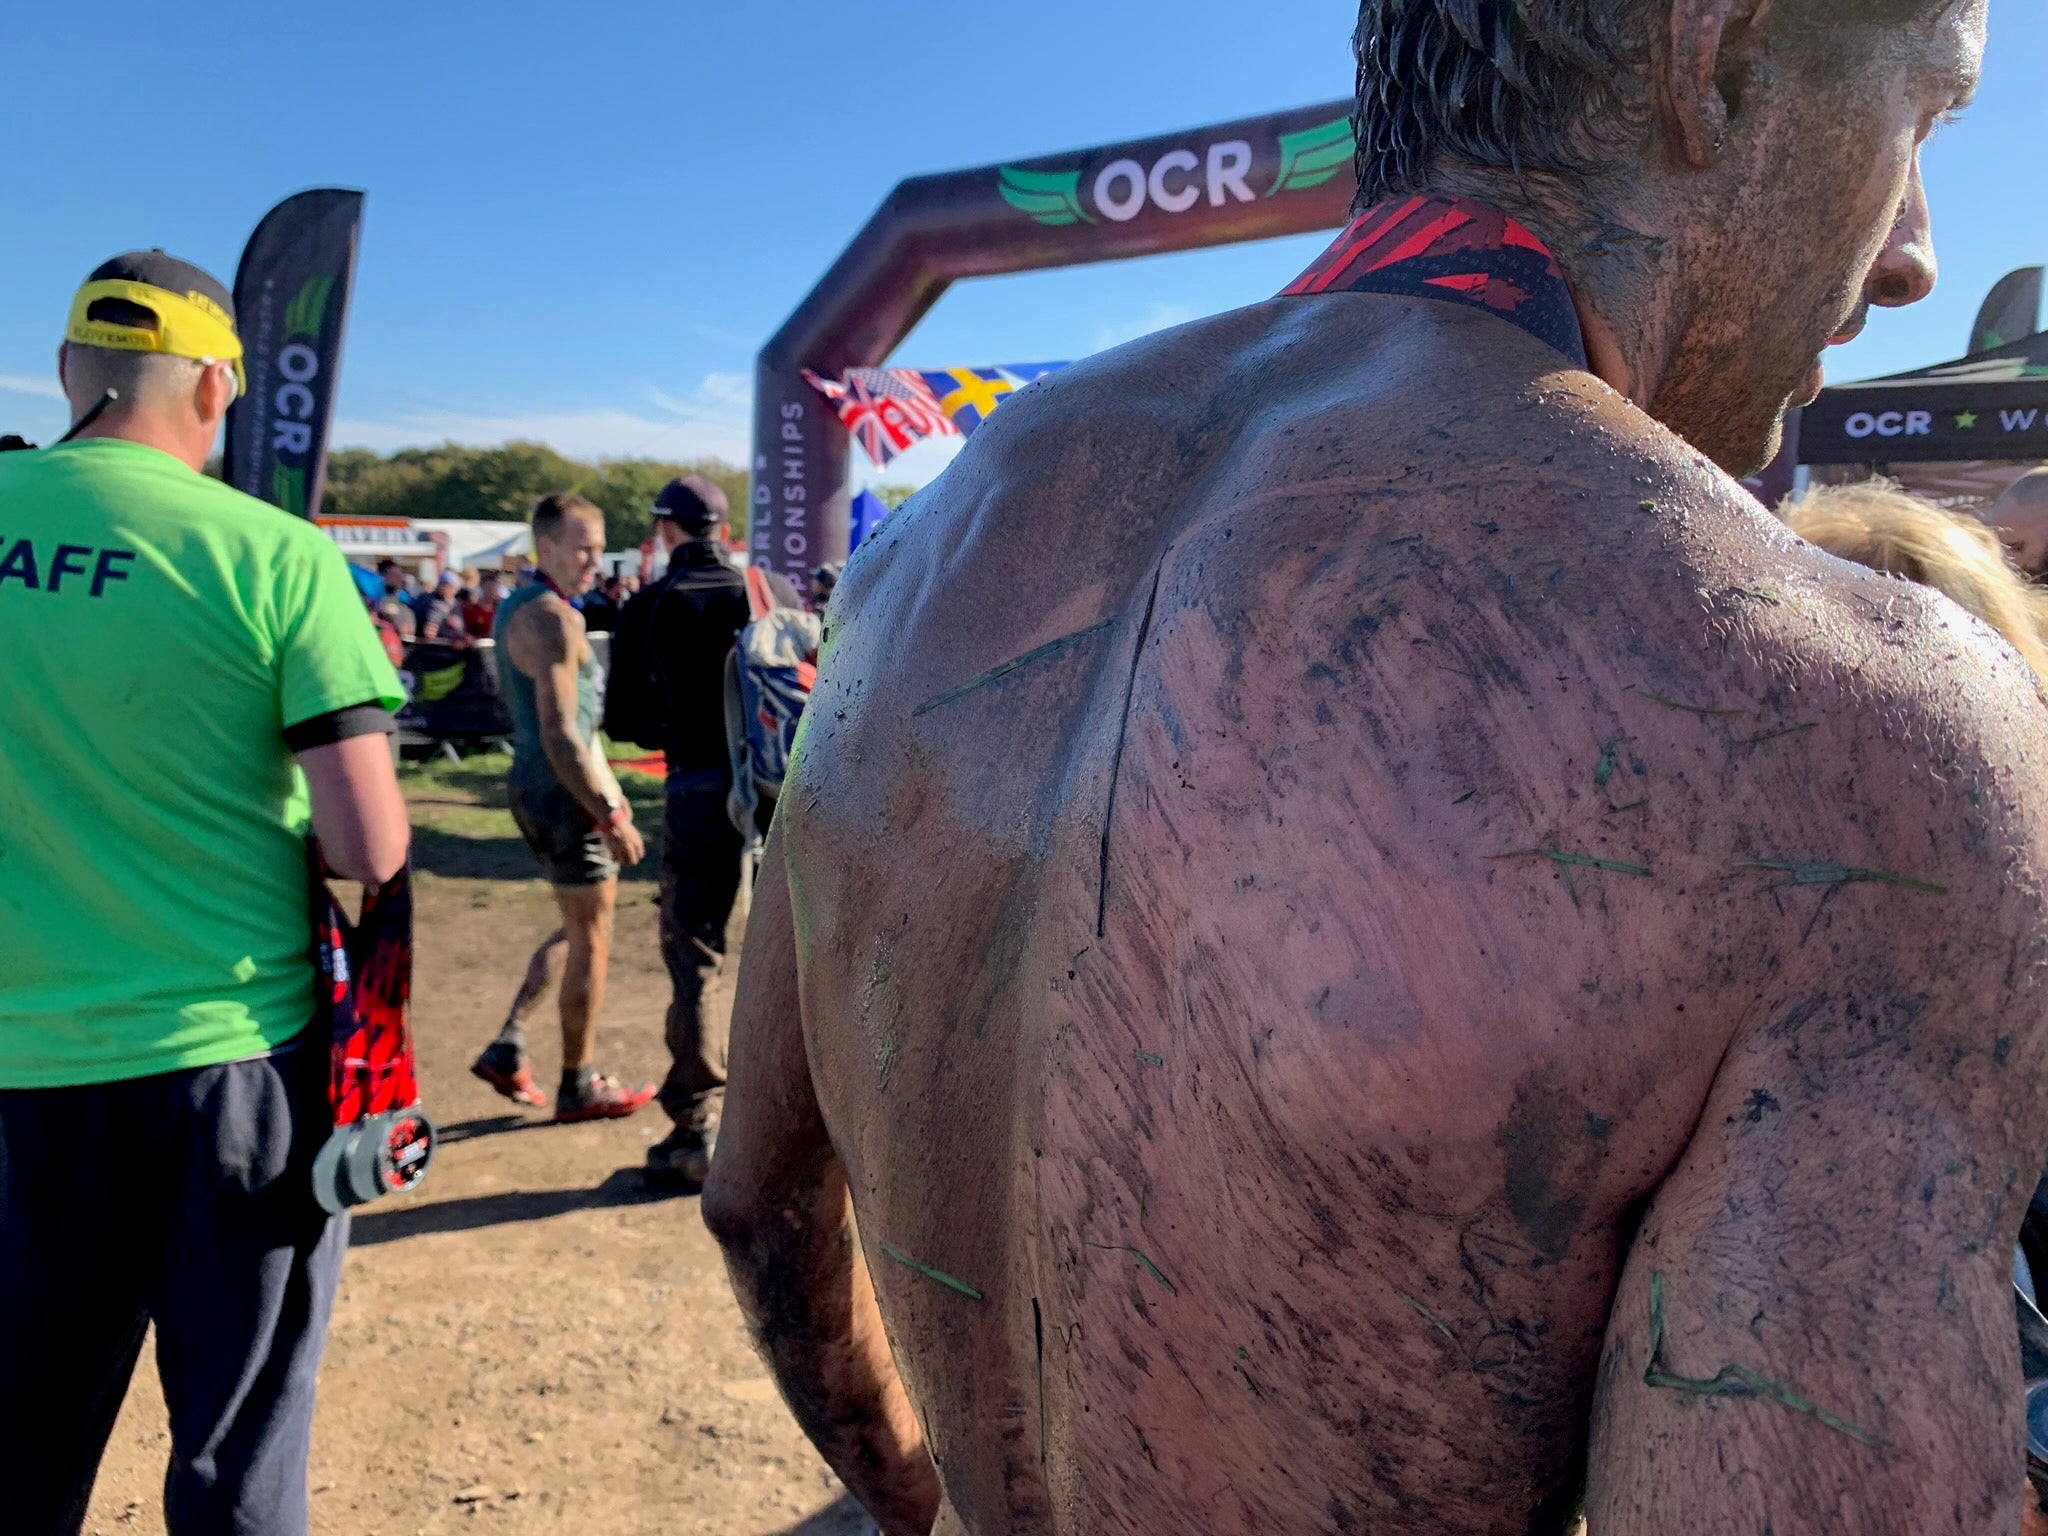 Spartan, Obstacle Racing or Tough Mudder training: How to get fit for the mud!